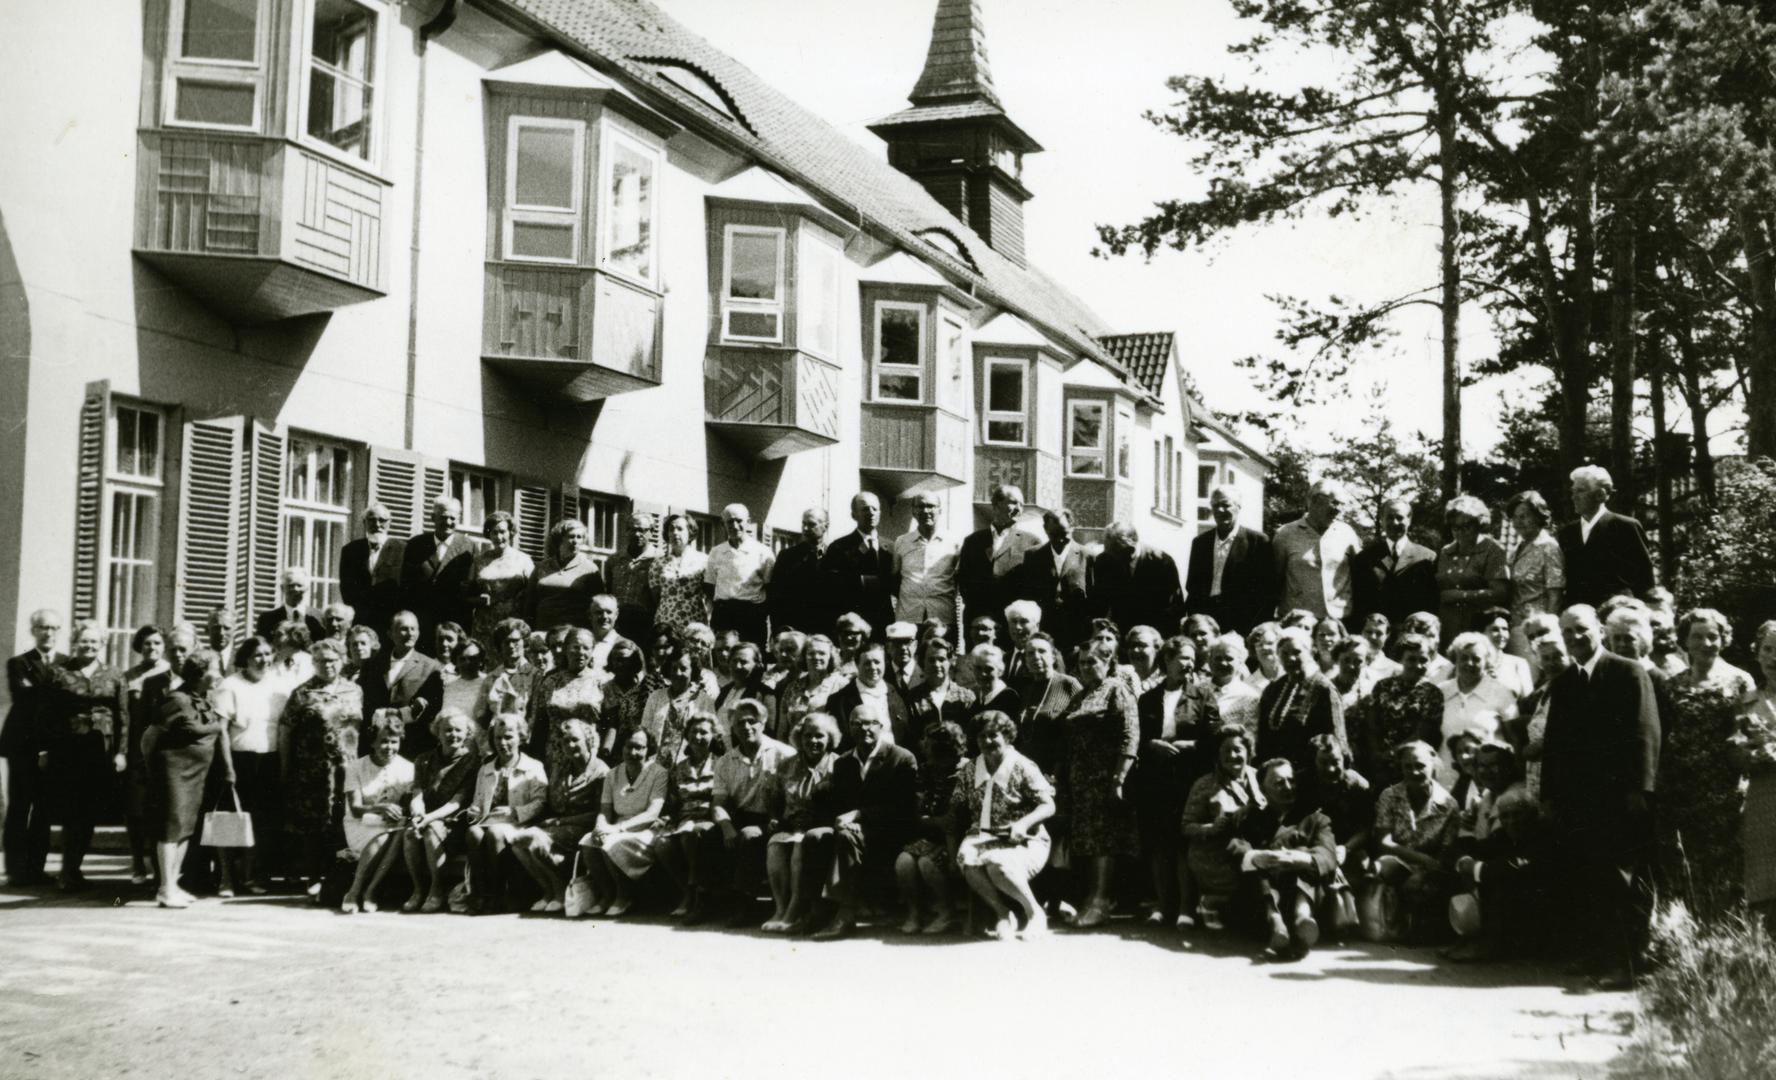 Rakvere Teachers' Meeting of the Philistines of the Seminar in 1974 Kose-Lucated in Sanatorial Forest School